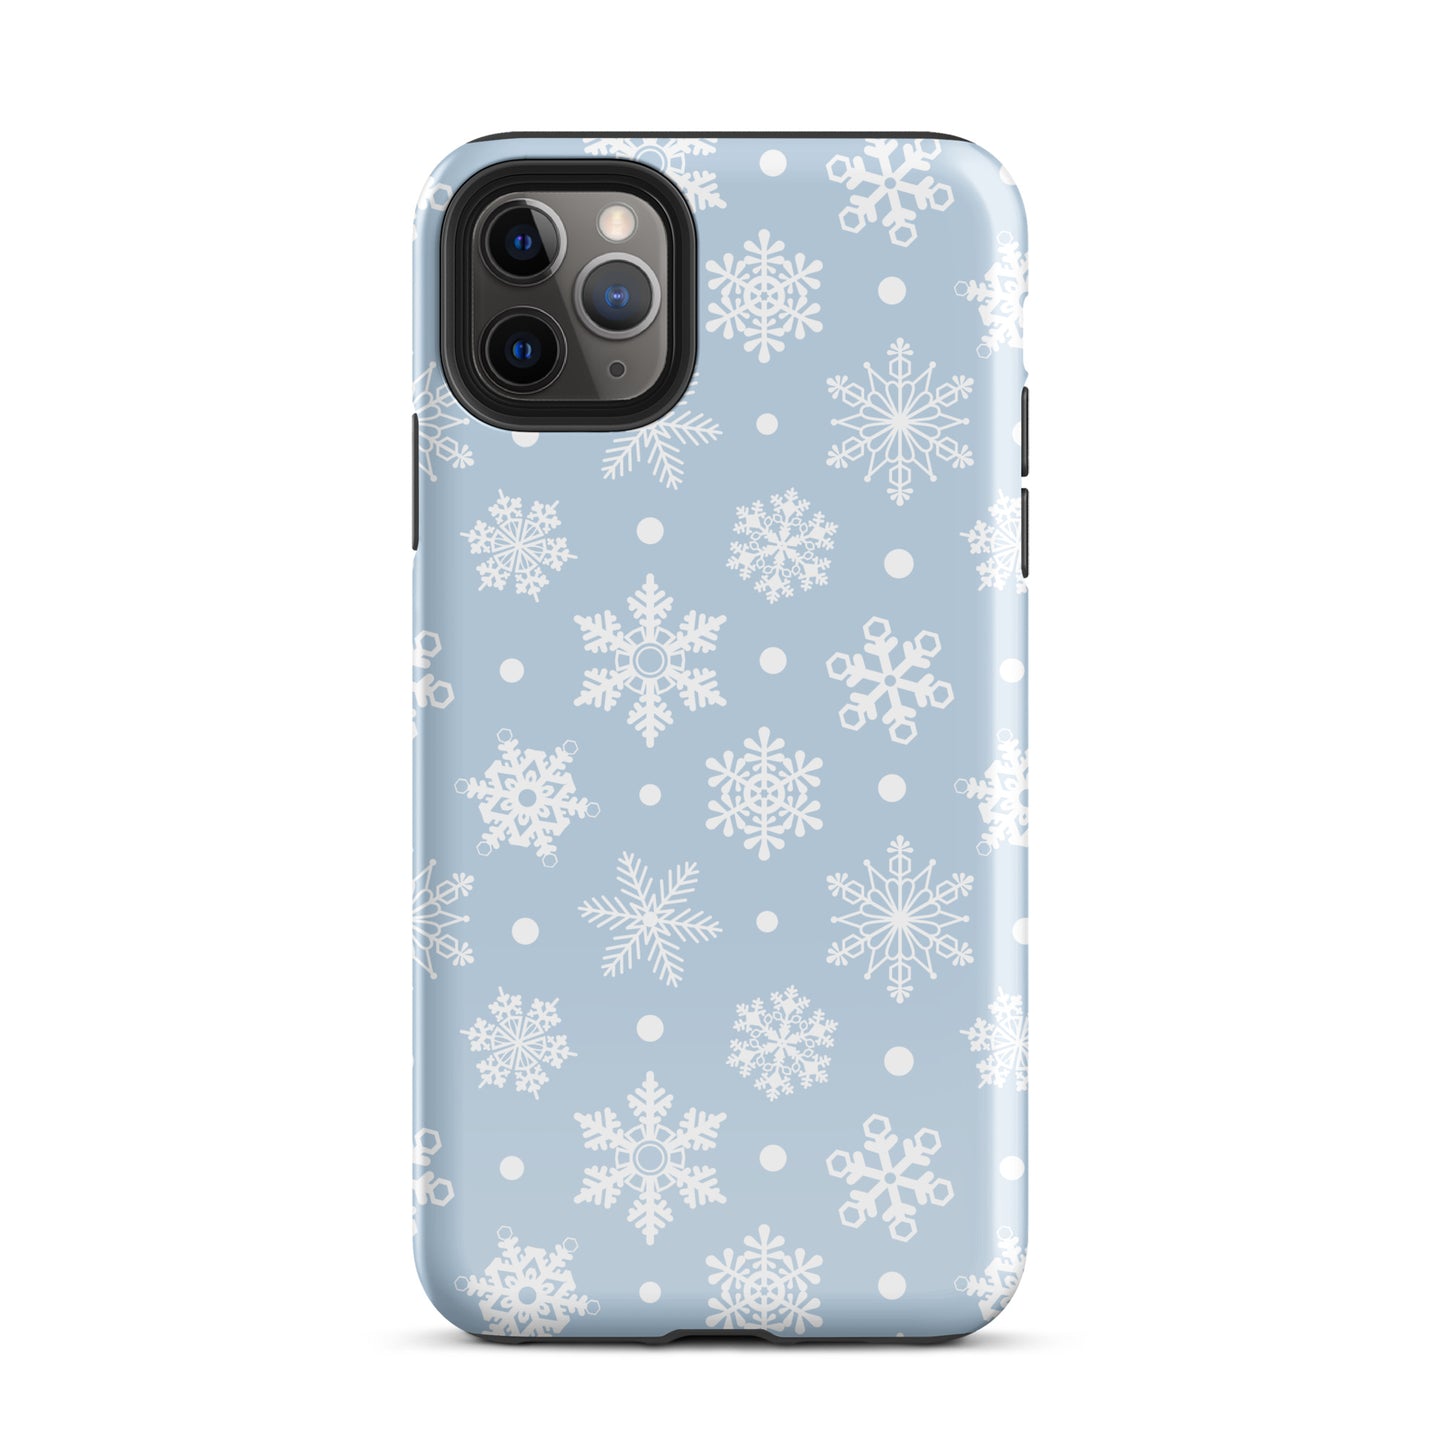 Snowflakes iPhone Case iPhone 11 Pro Max Glossy